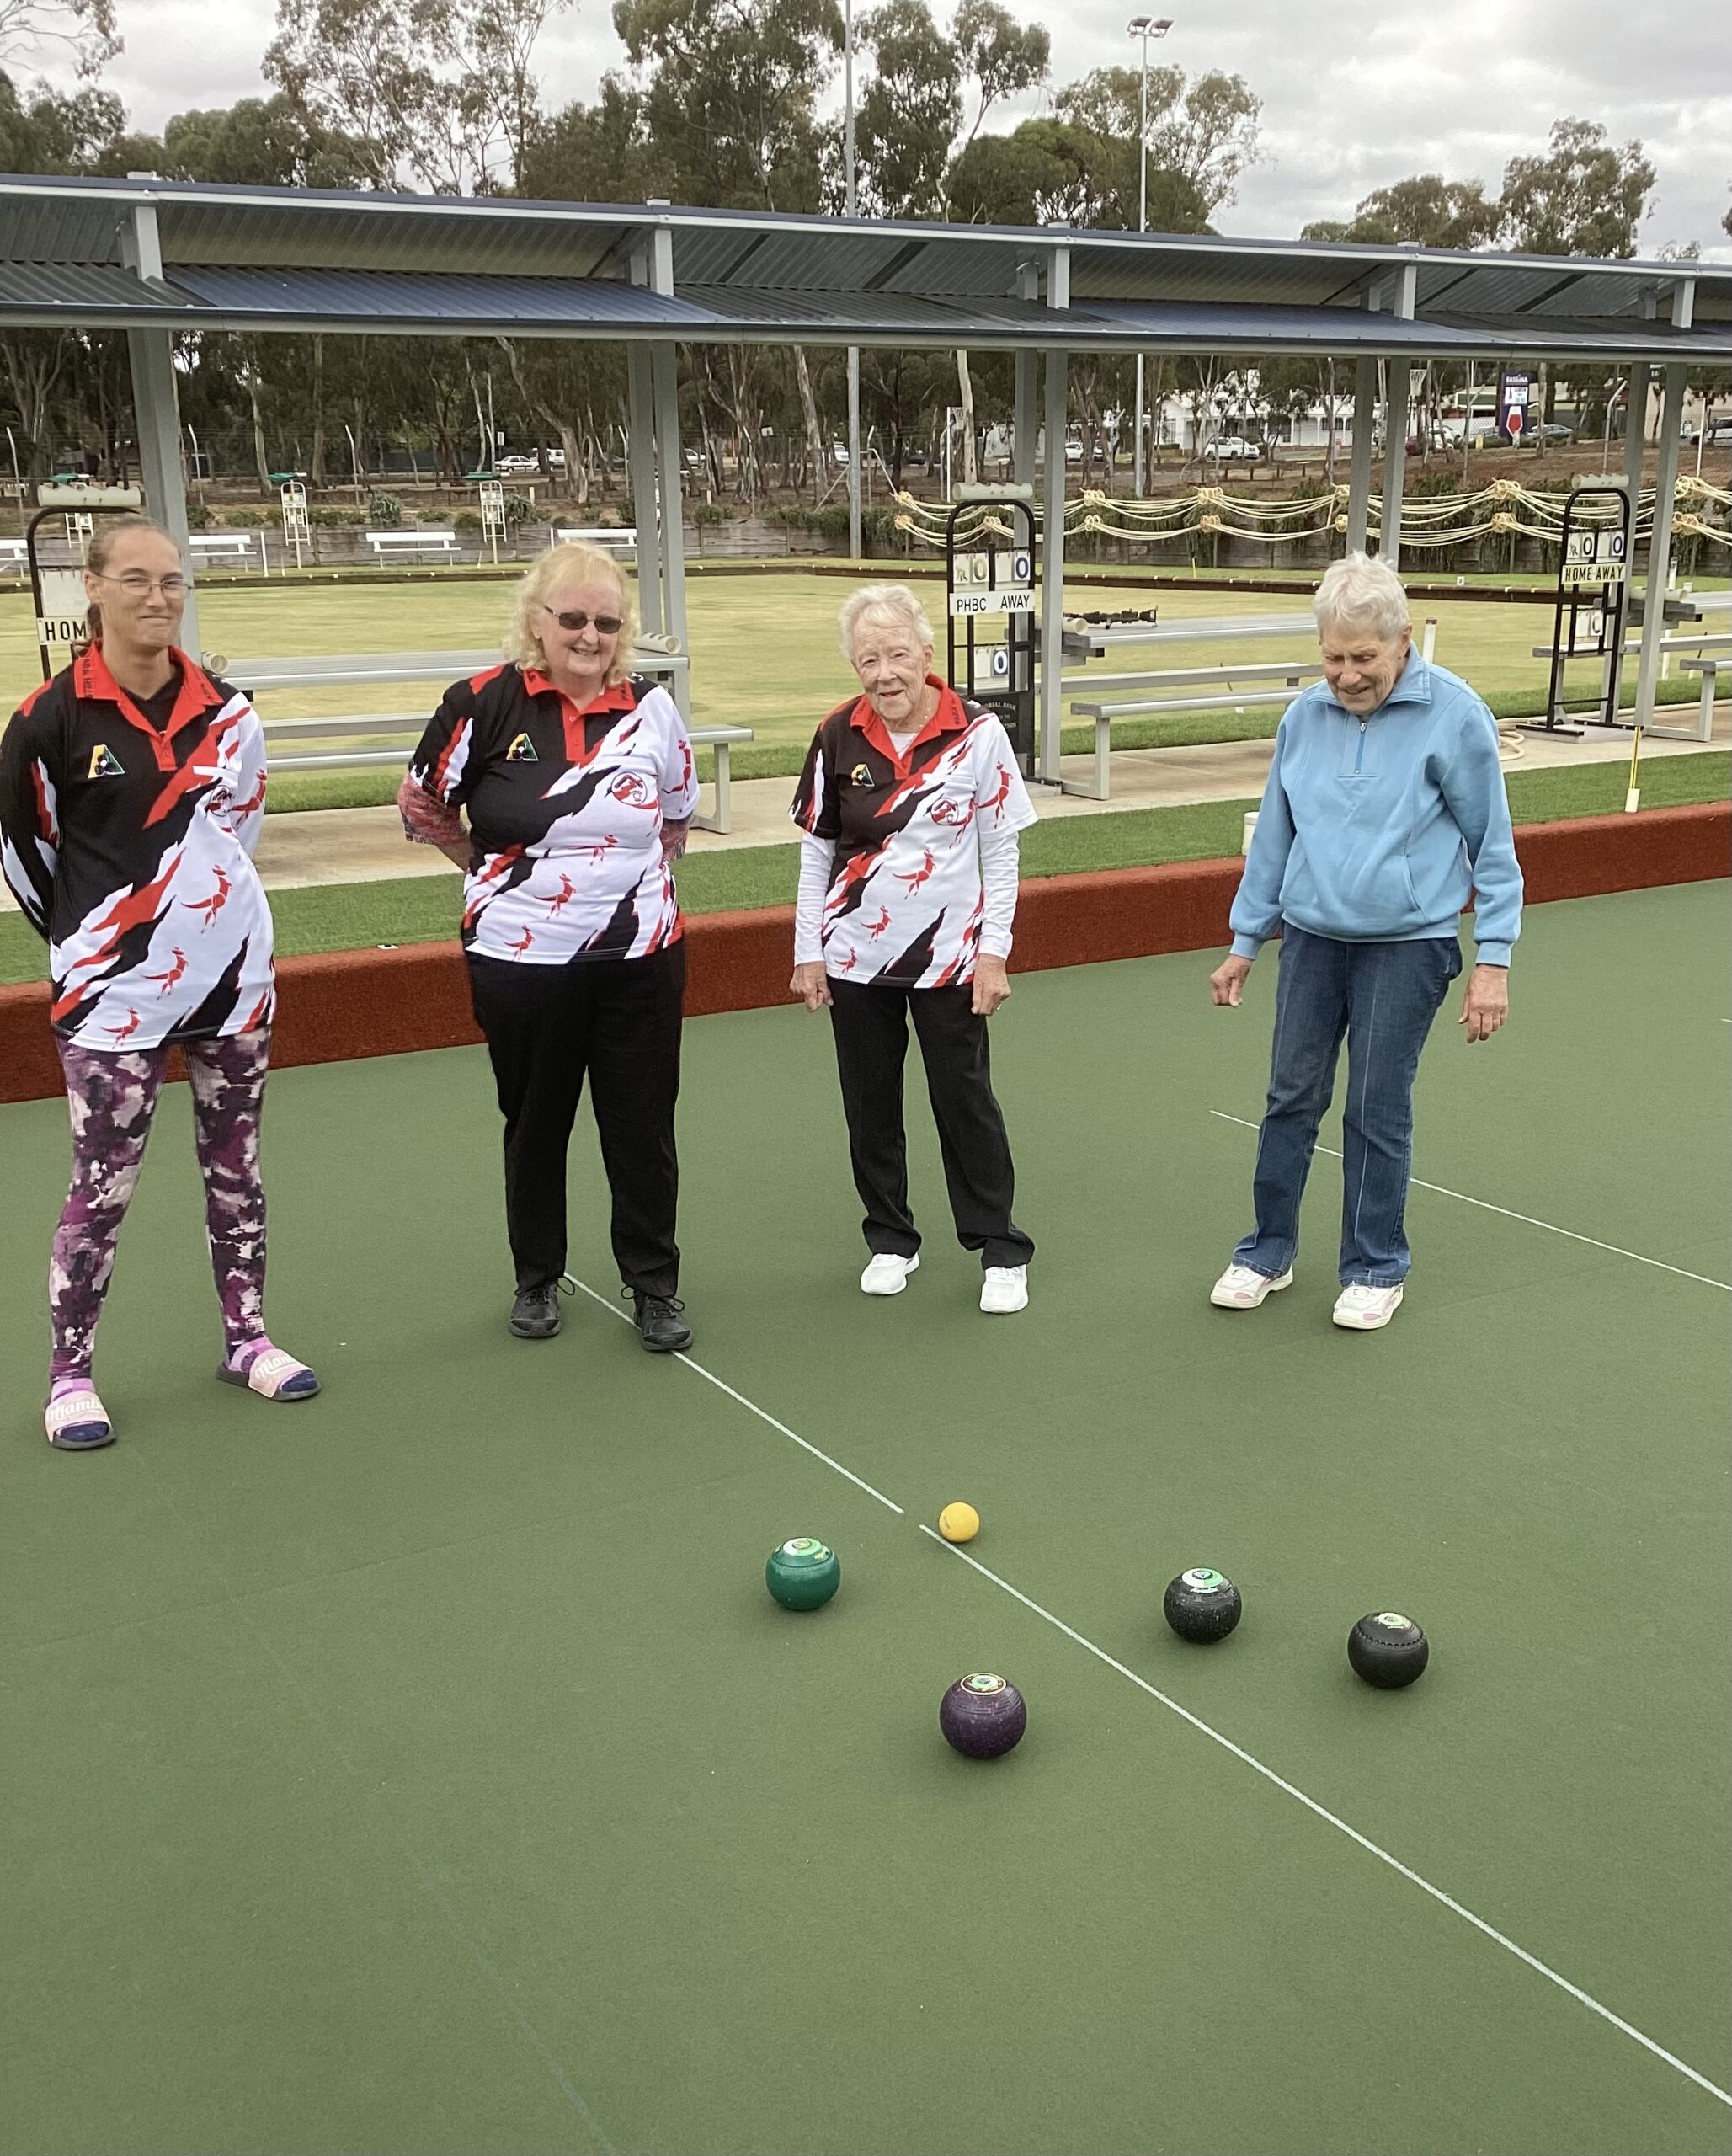 Ladies now is your chance to try   Something different..a game for all ages… yes it’s “Lawn Bowls